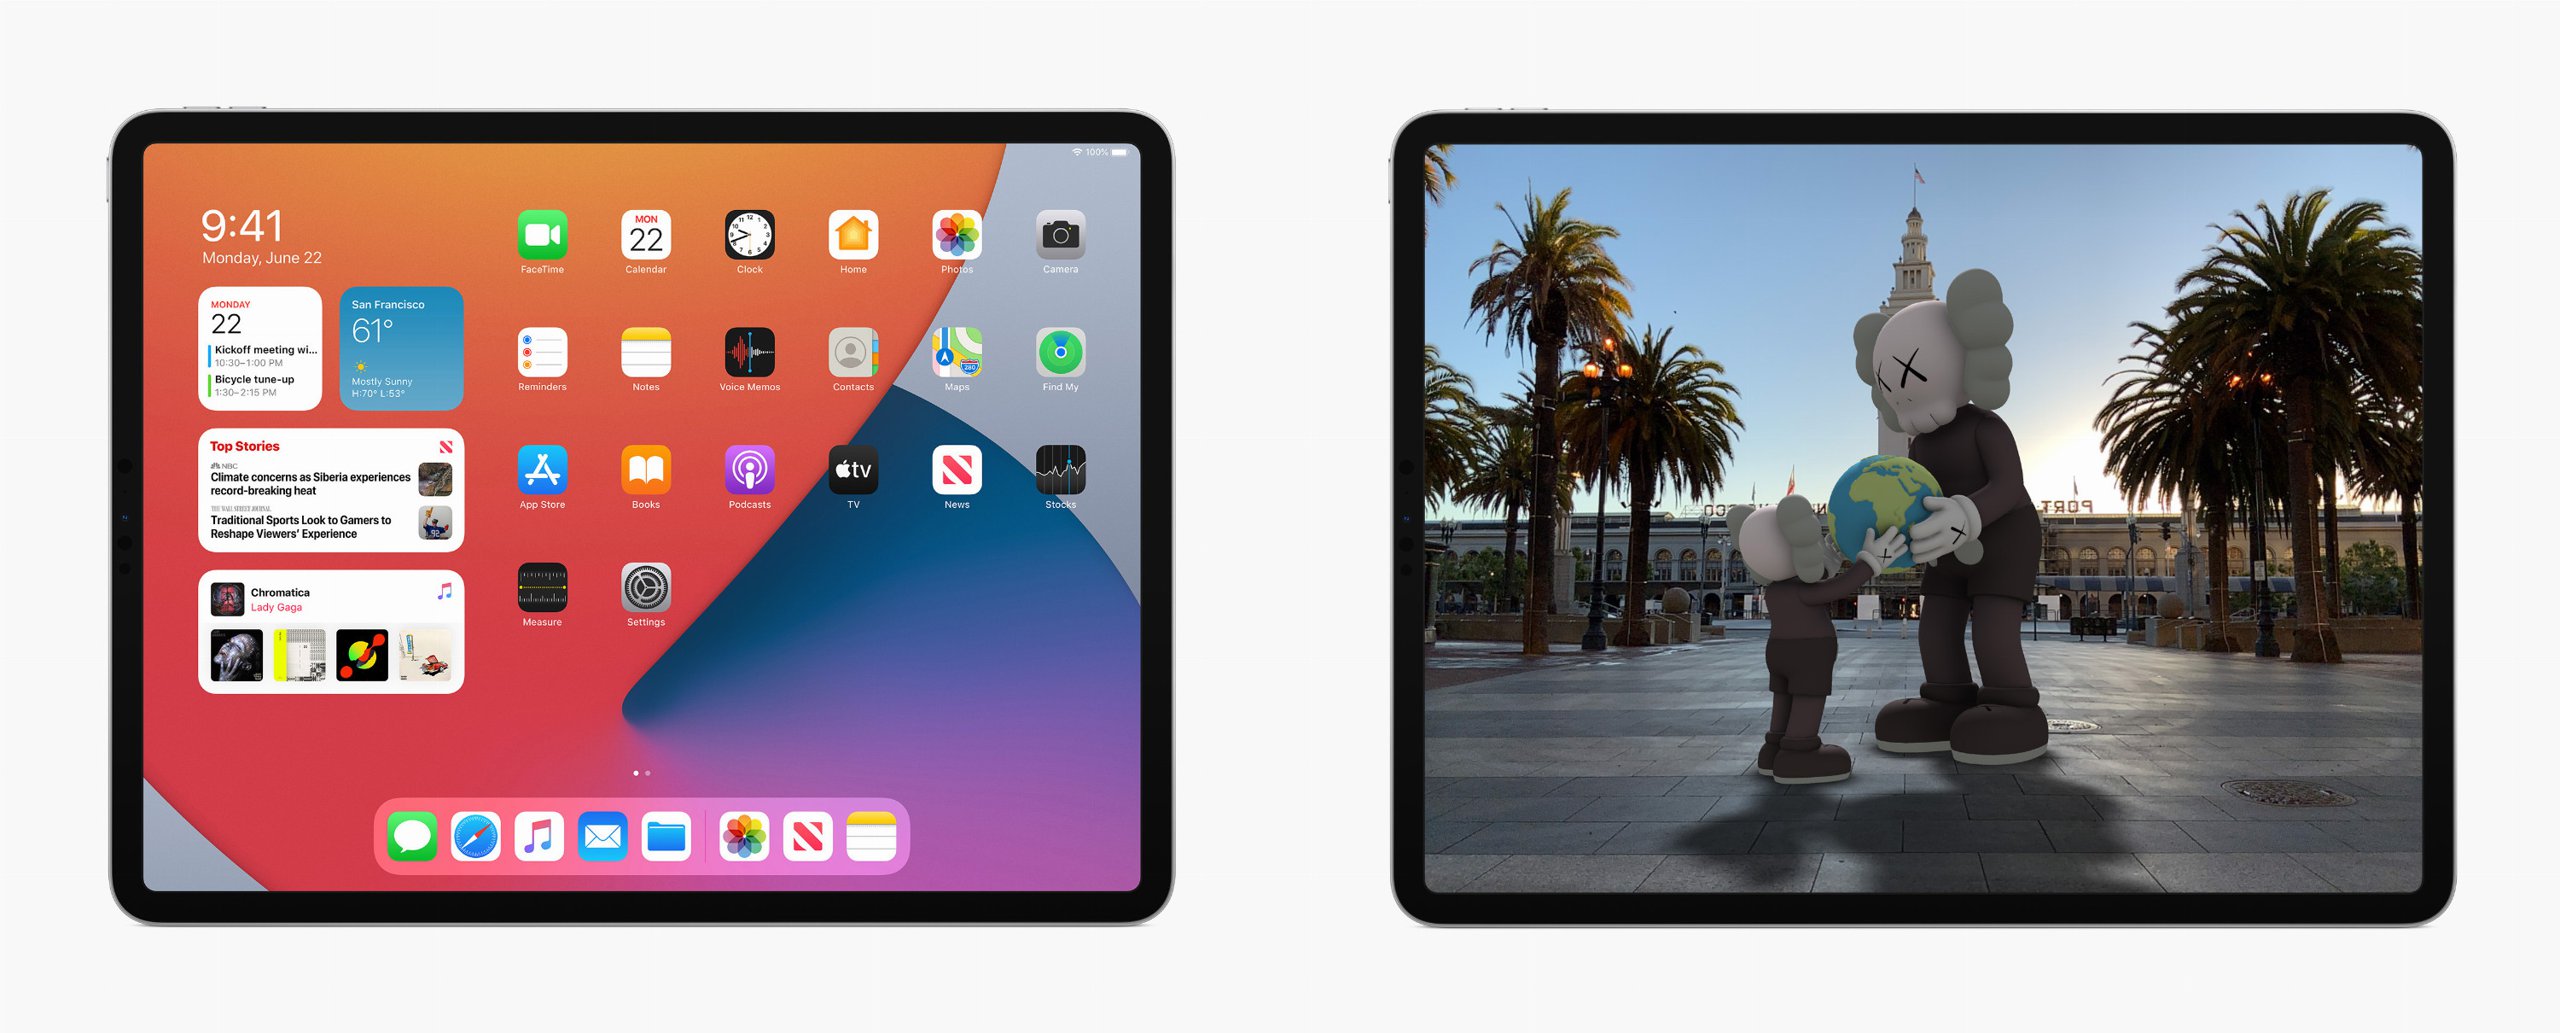 Post Banner for iPadOS 14 Announced at WWDC20 with Improved UI and Powerful New Handwriting Features with Apple Pencil